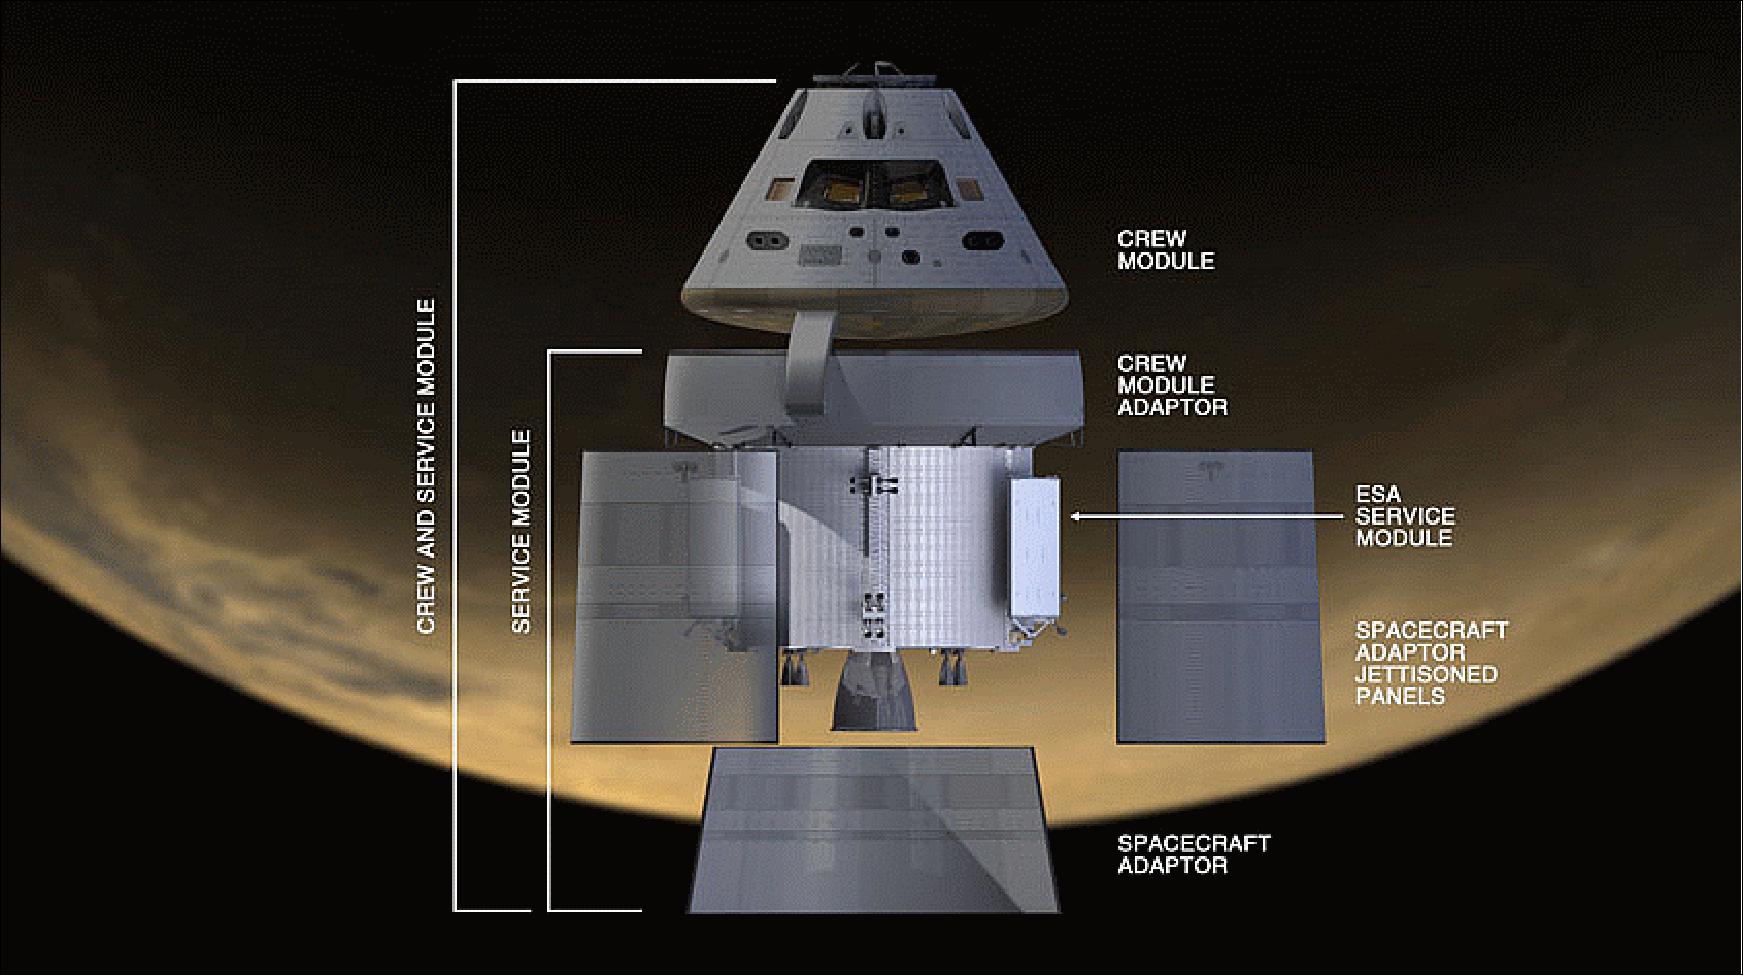 Figure 9: Orion schematic layout (image credit: NASA)